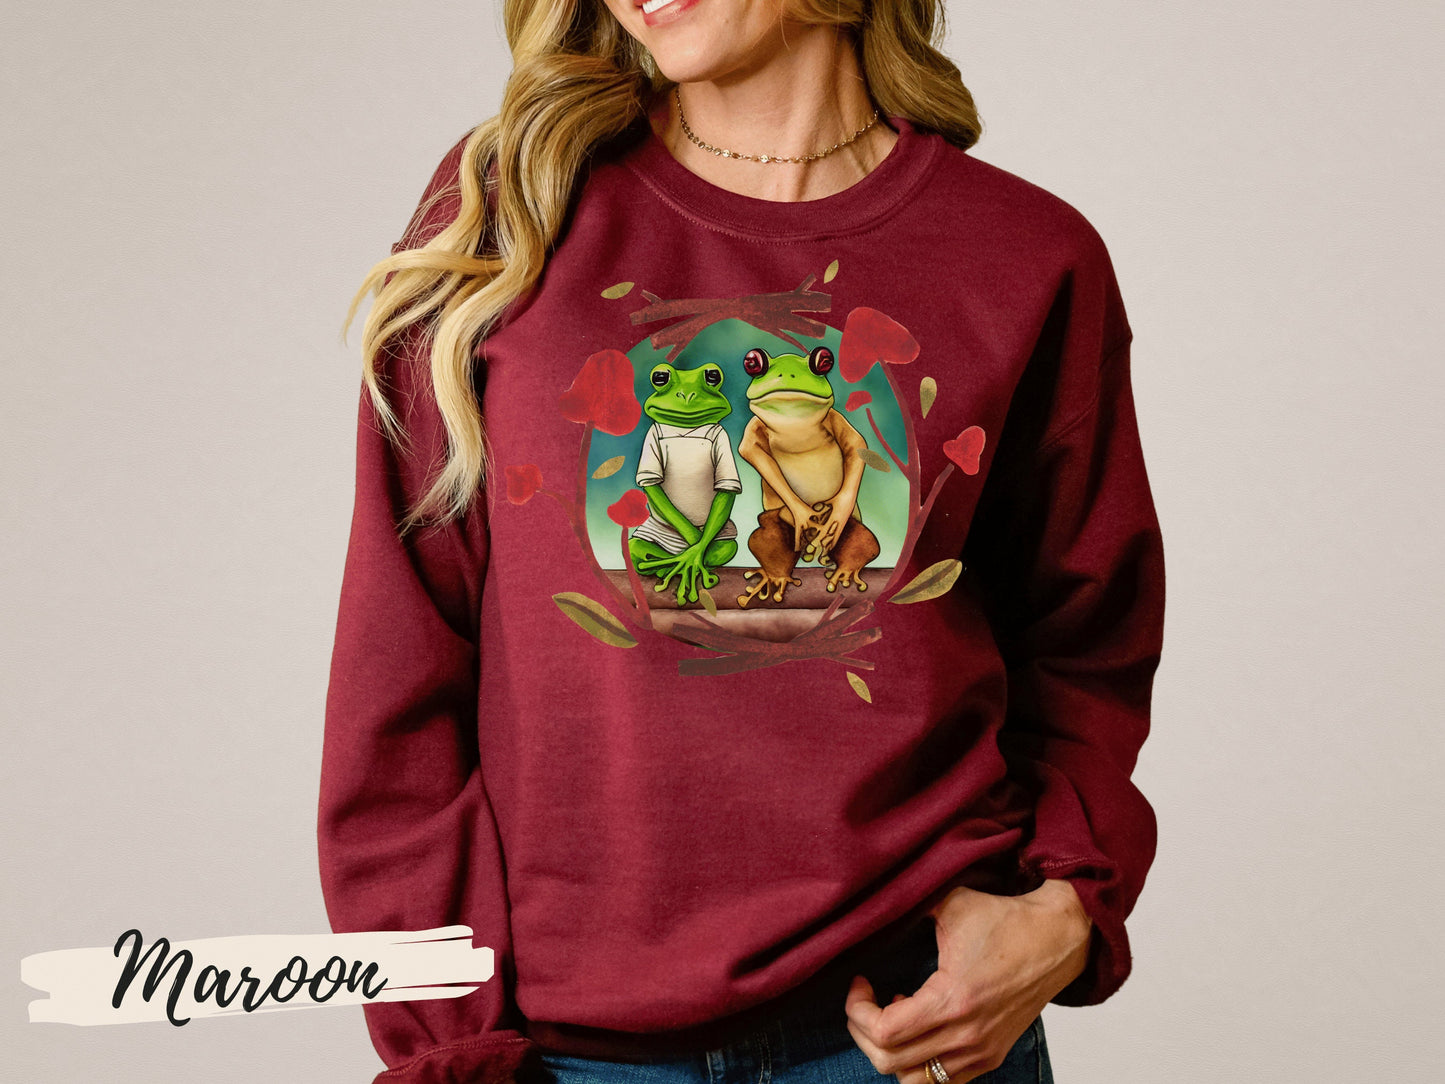 Frog and Toad Sweatshirt, Watercolor Print of Frog and Toad Sitting on a Log, Frog Lover Gift, Green Tree Frog Shirt